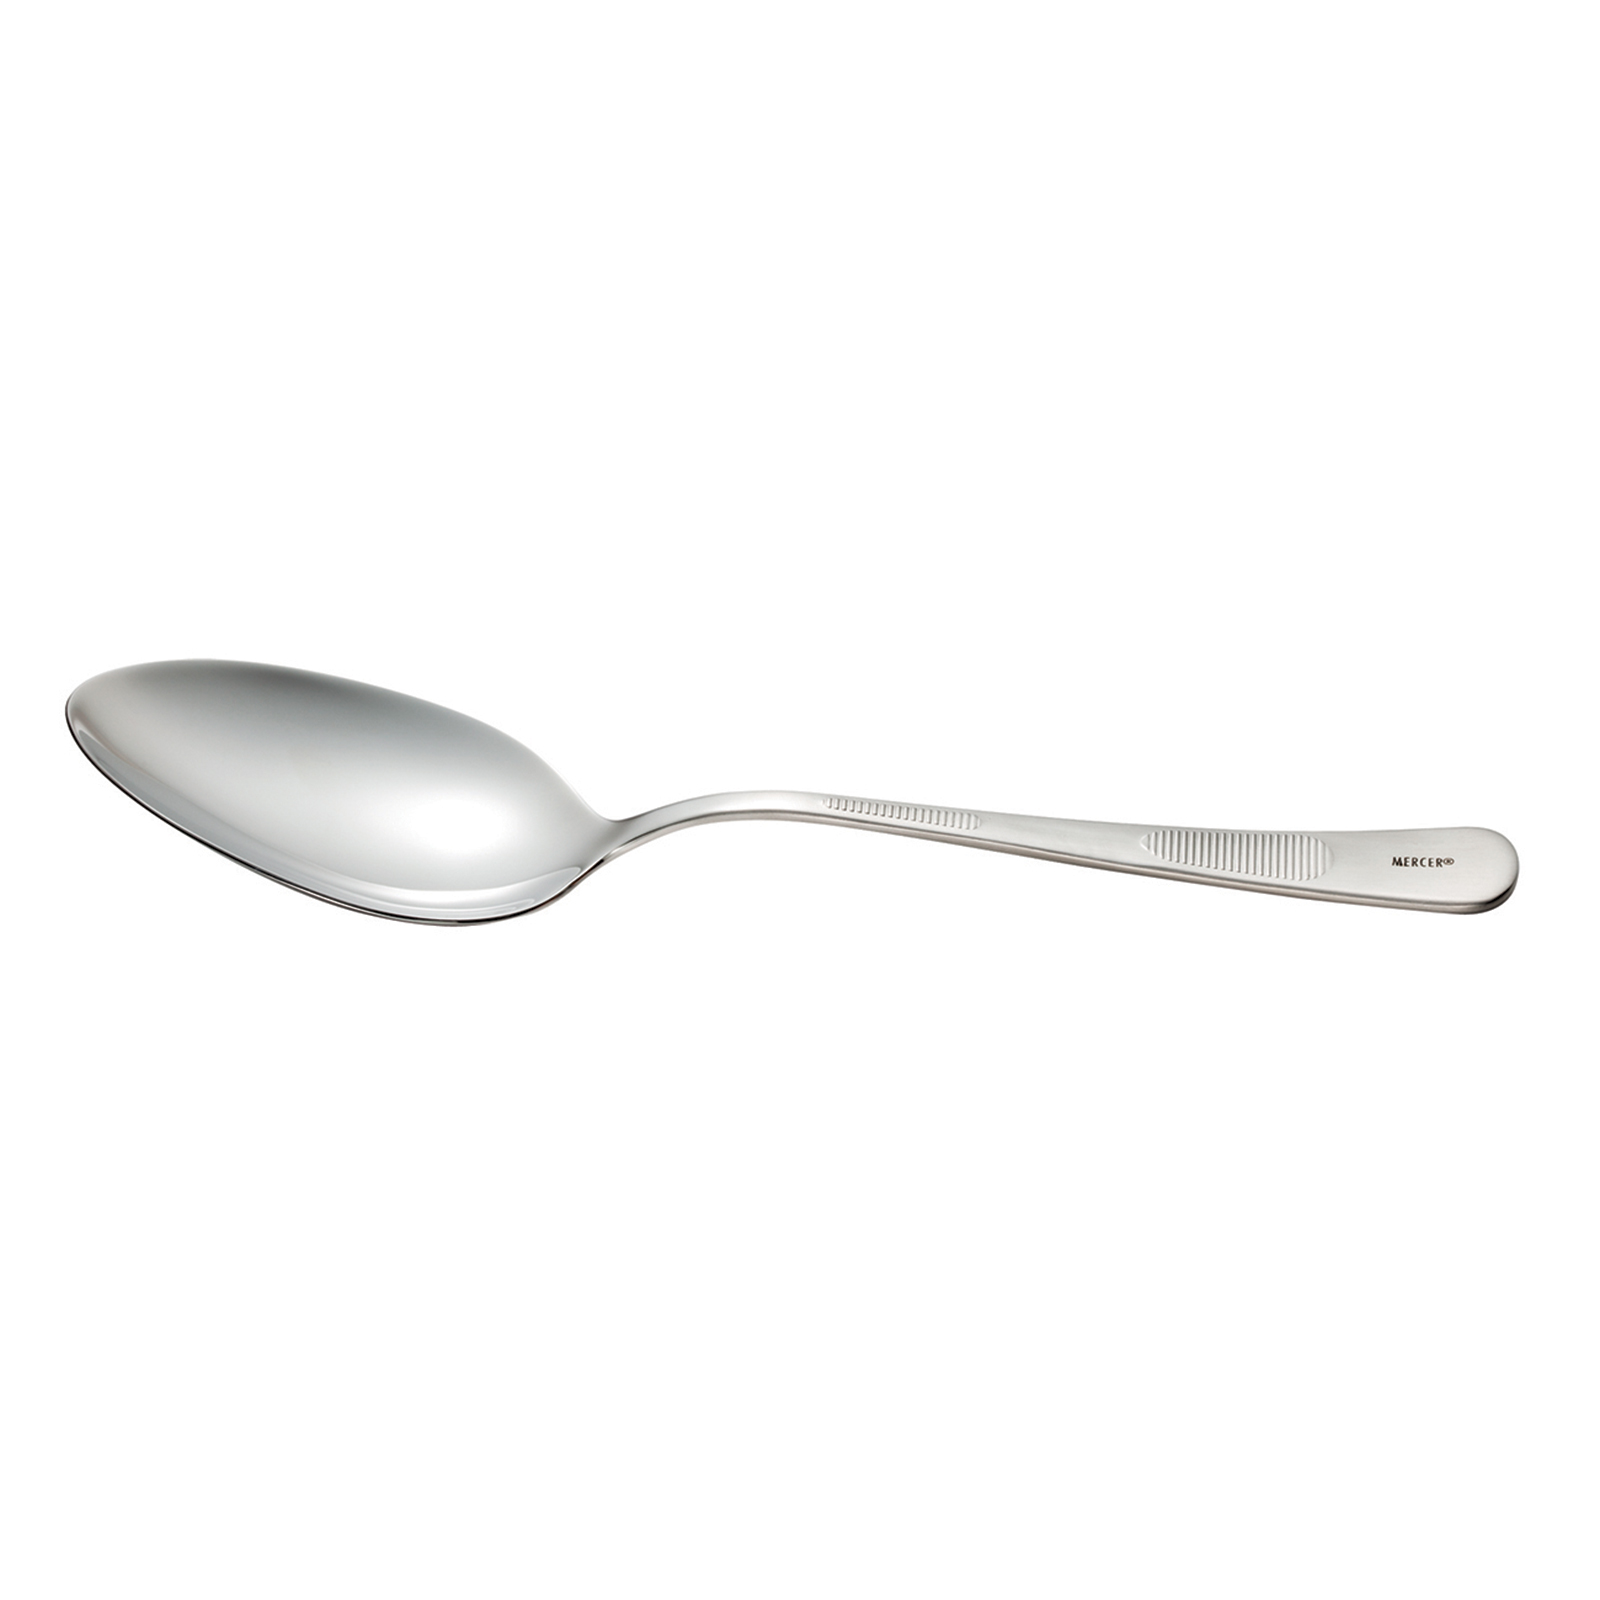 Mercer Culinary M35138 Serving Spoon, Solid